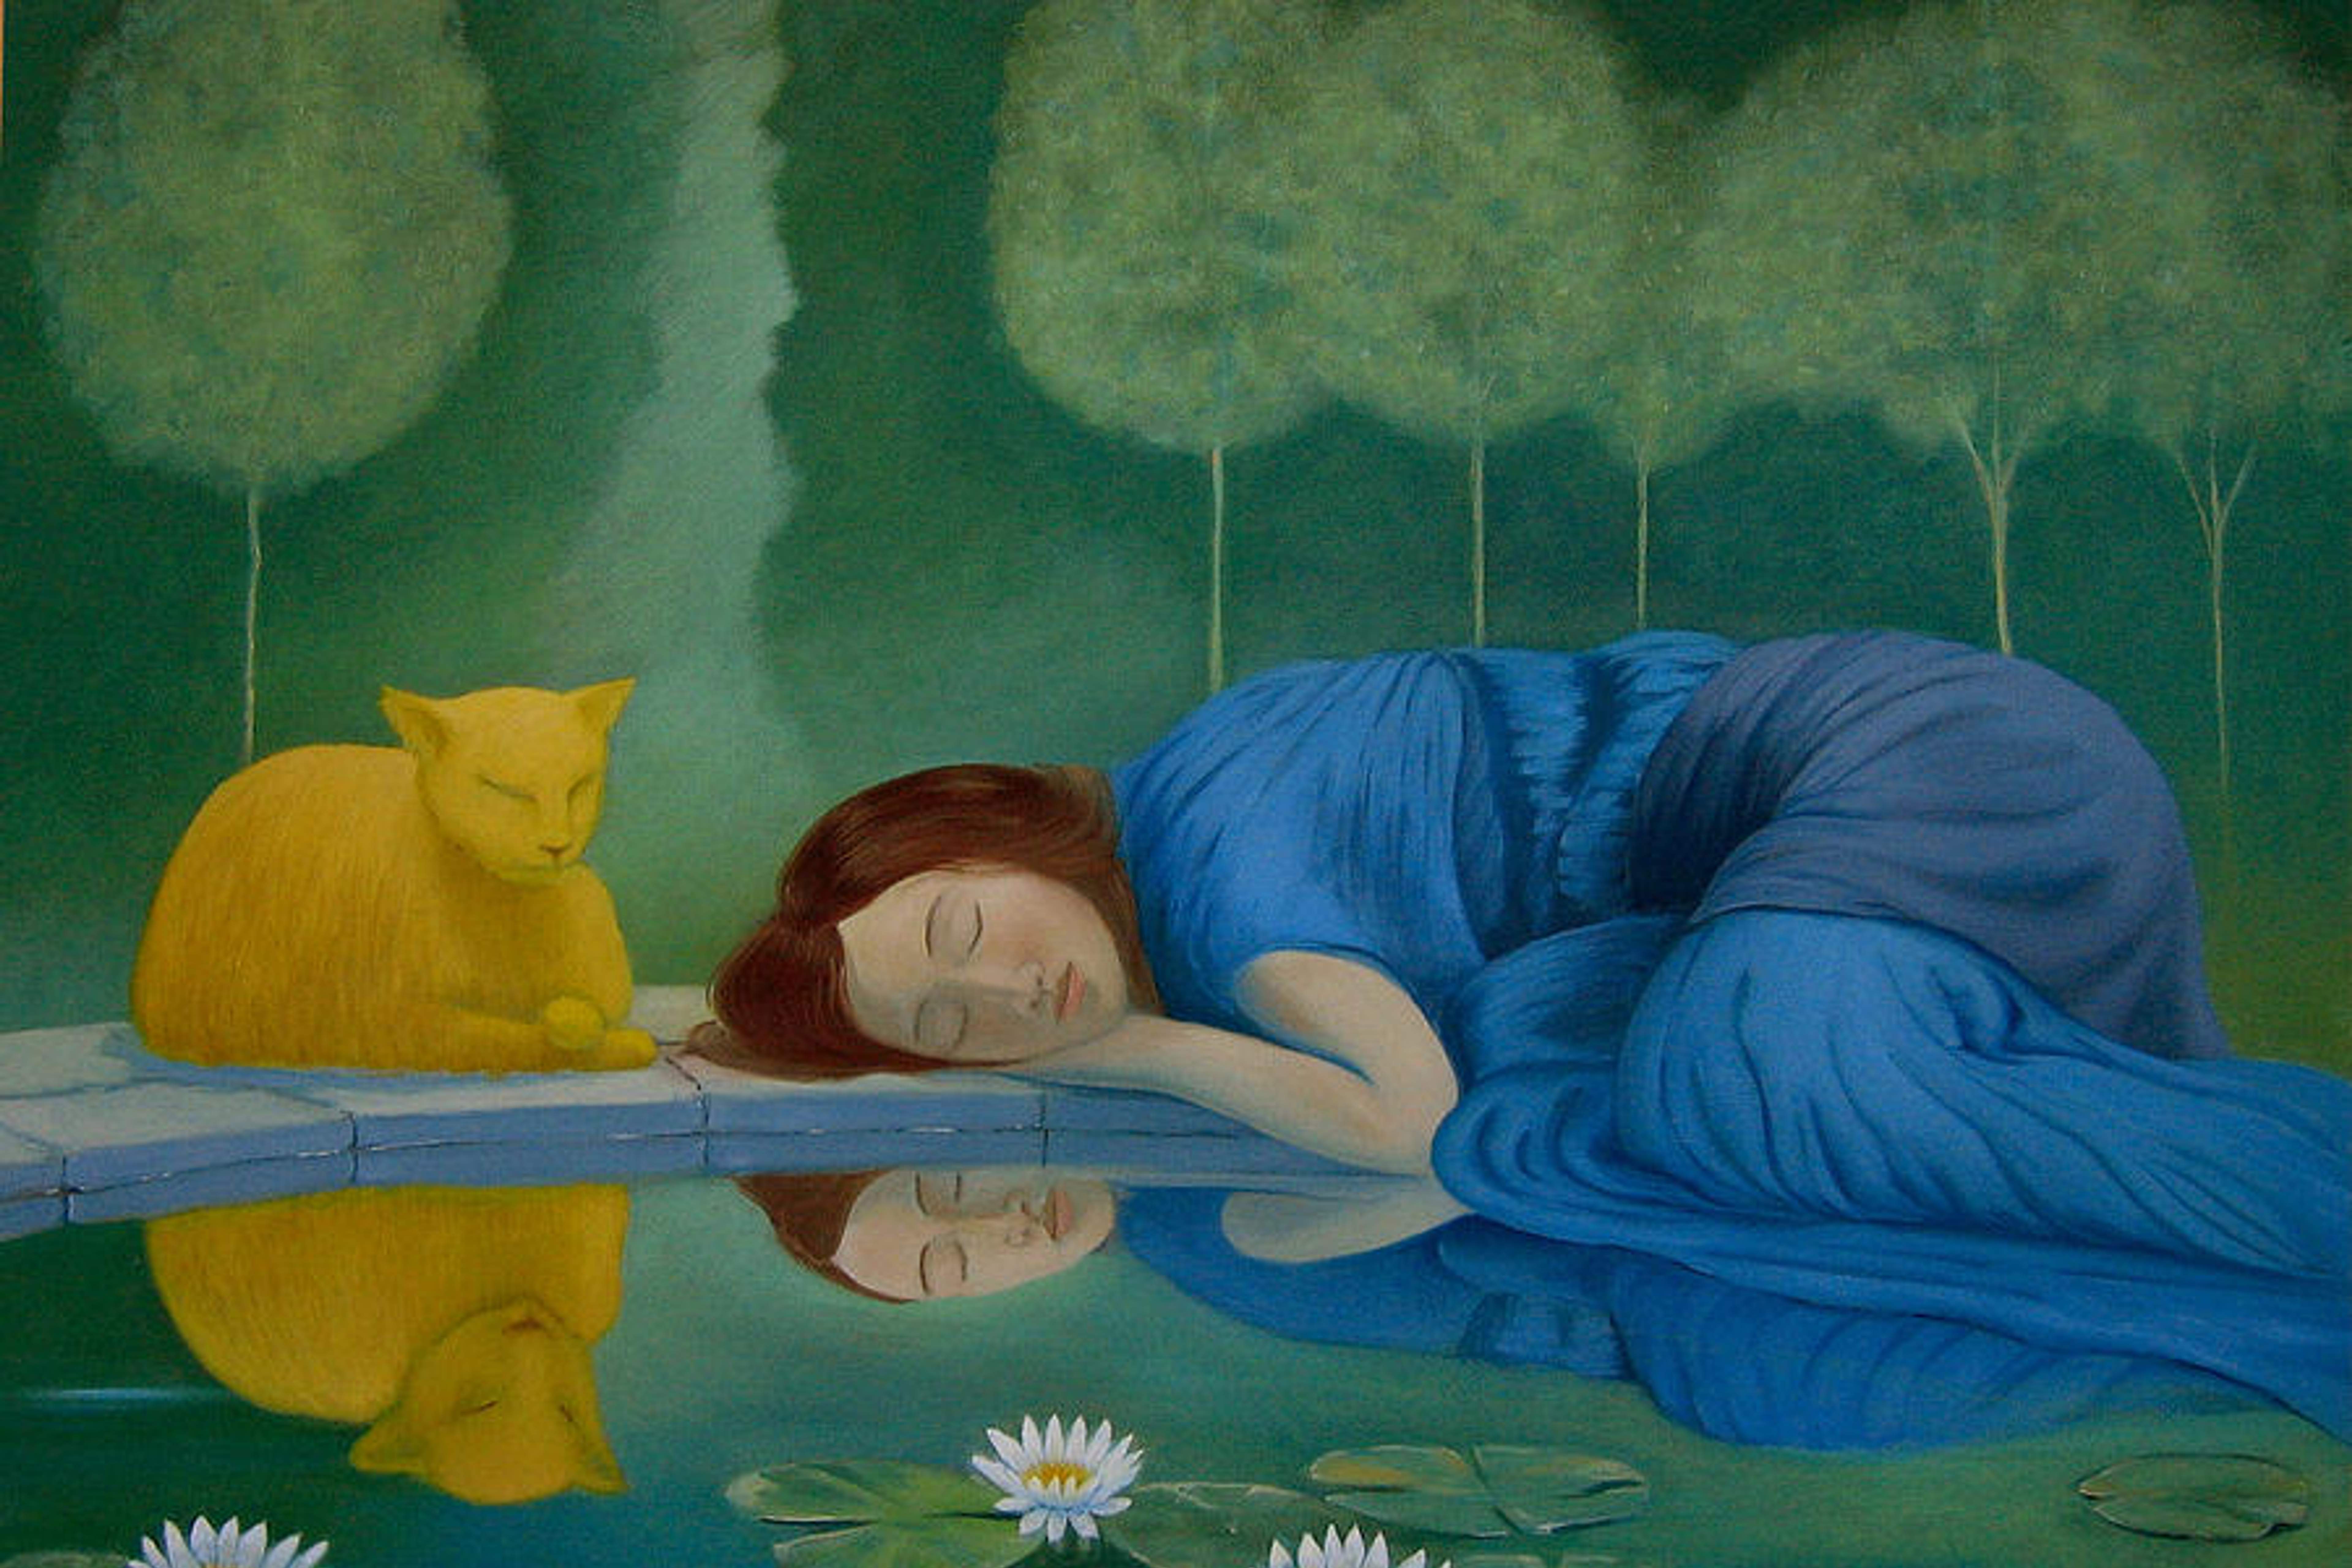 A painting of a woman and a cat sleeping peacefully near a pond with lily pads and flowers.